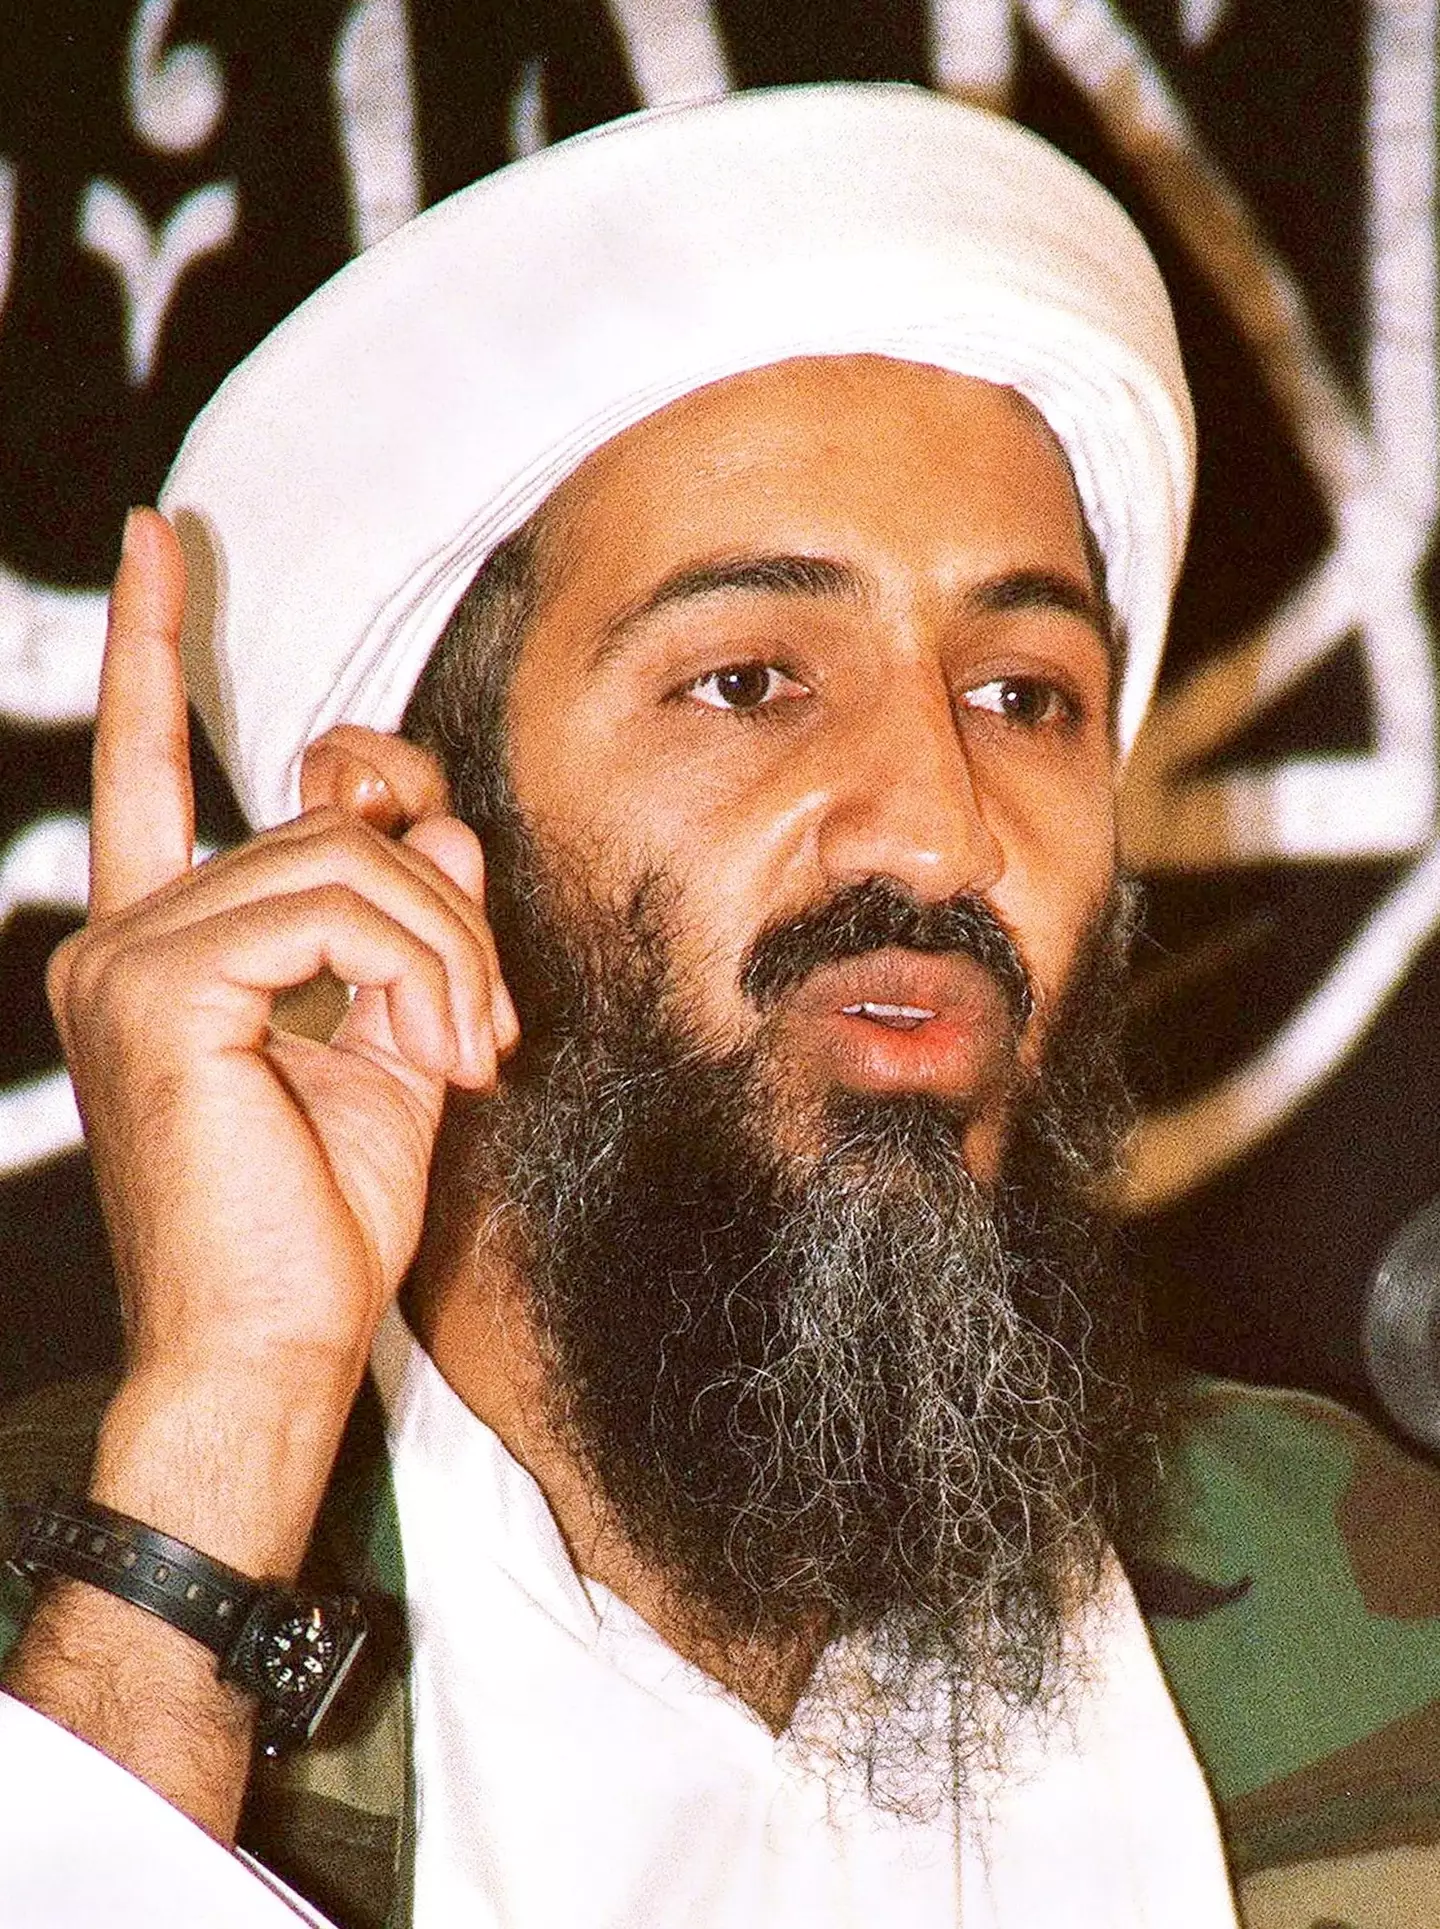 Osama Bin Laden took responsibility for the attacks in 2004 (